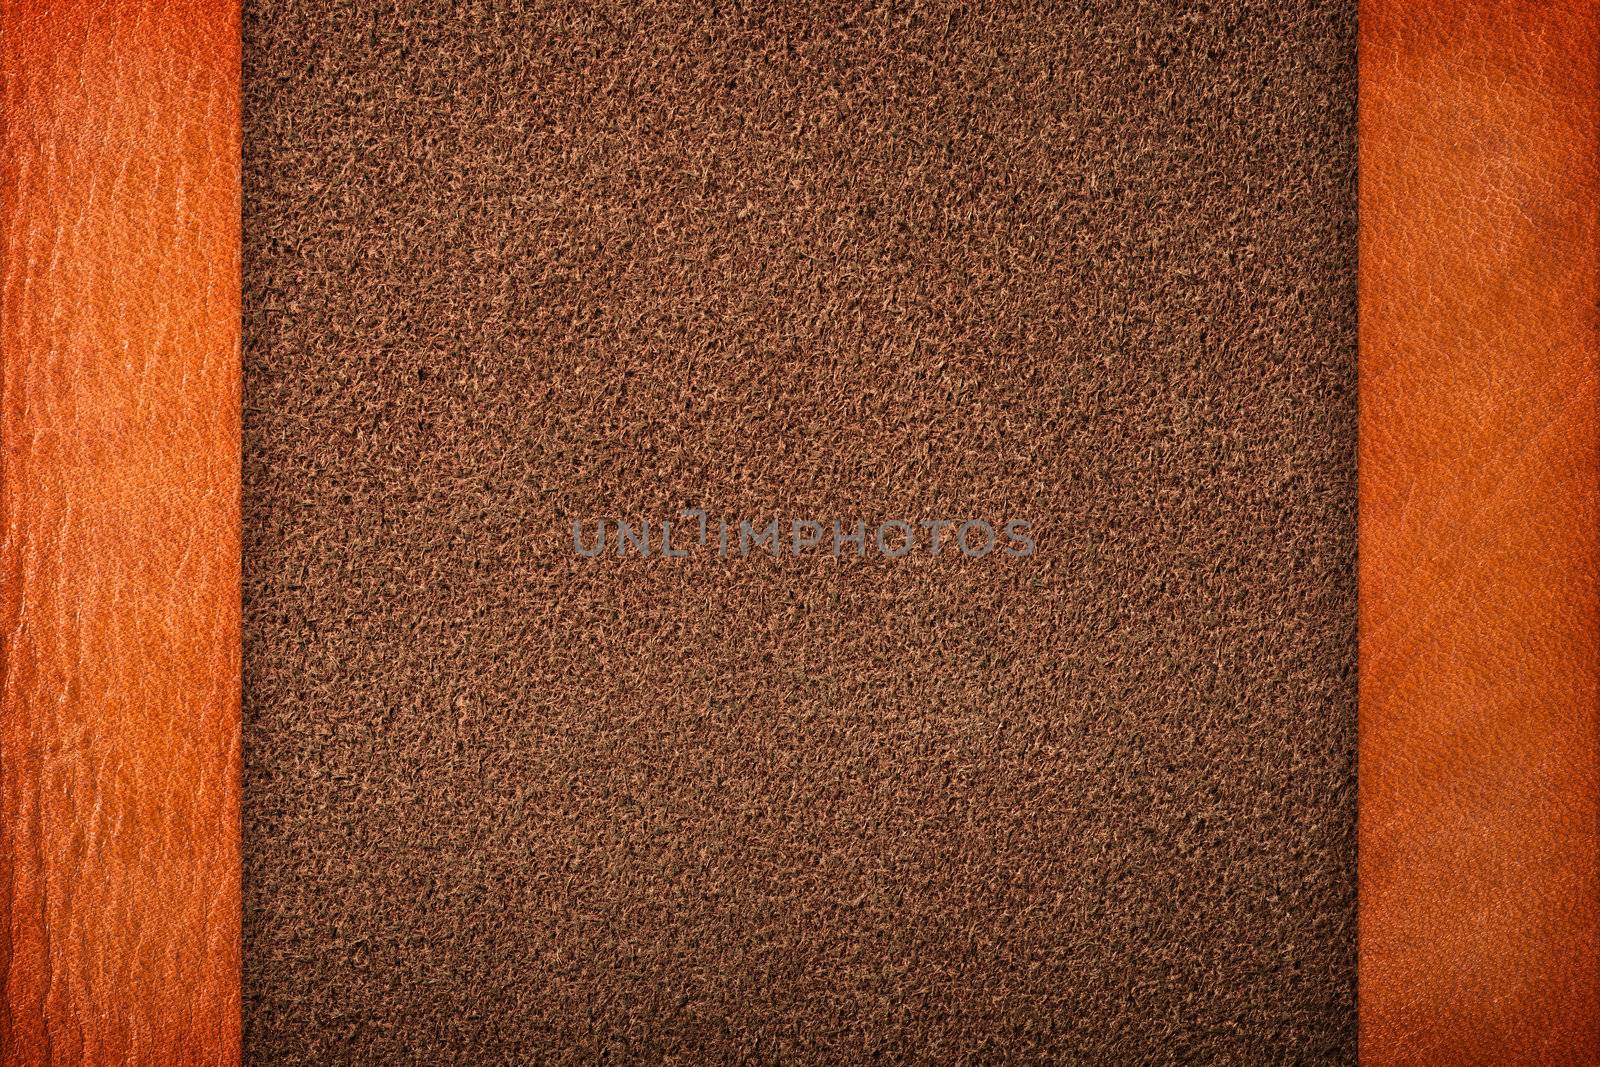 Brown leather textures for background, composition with margins